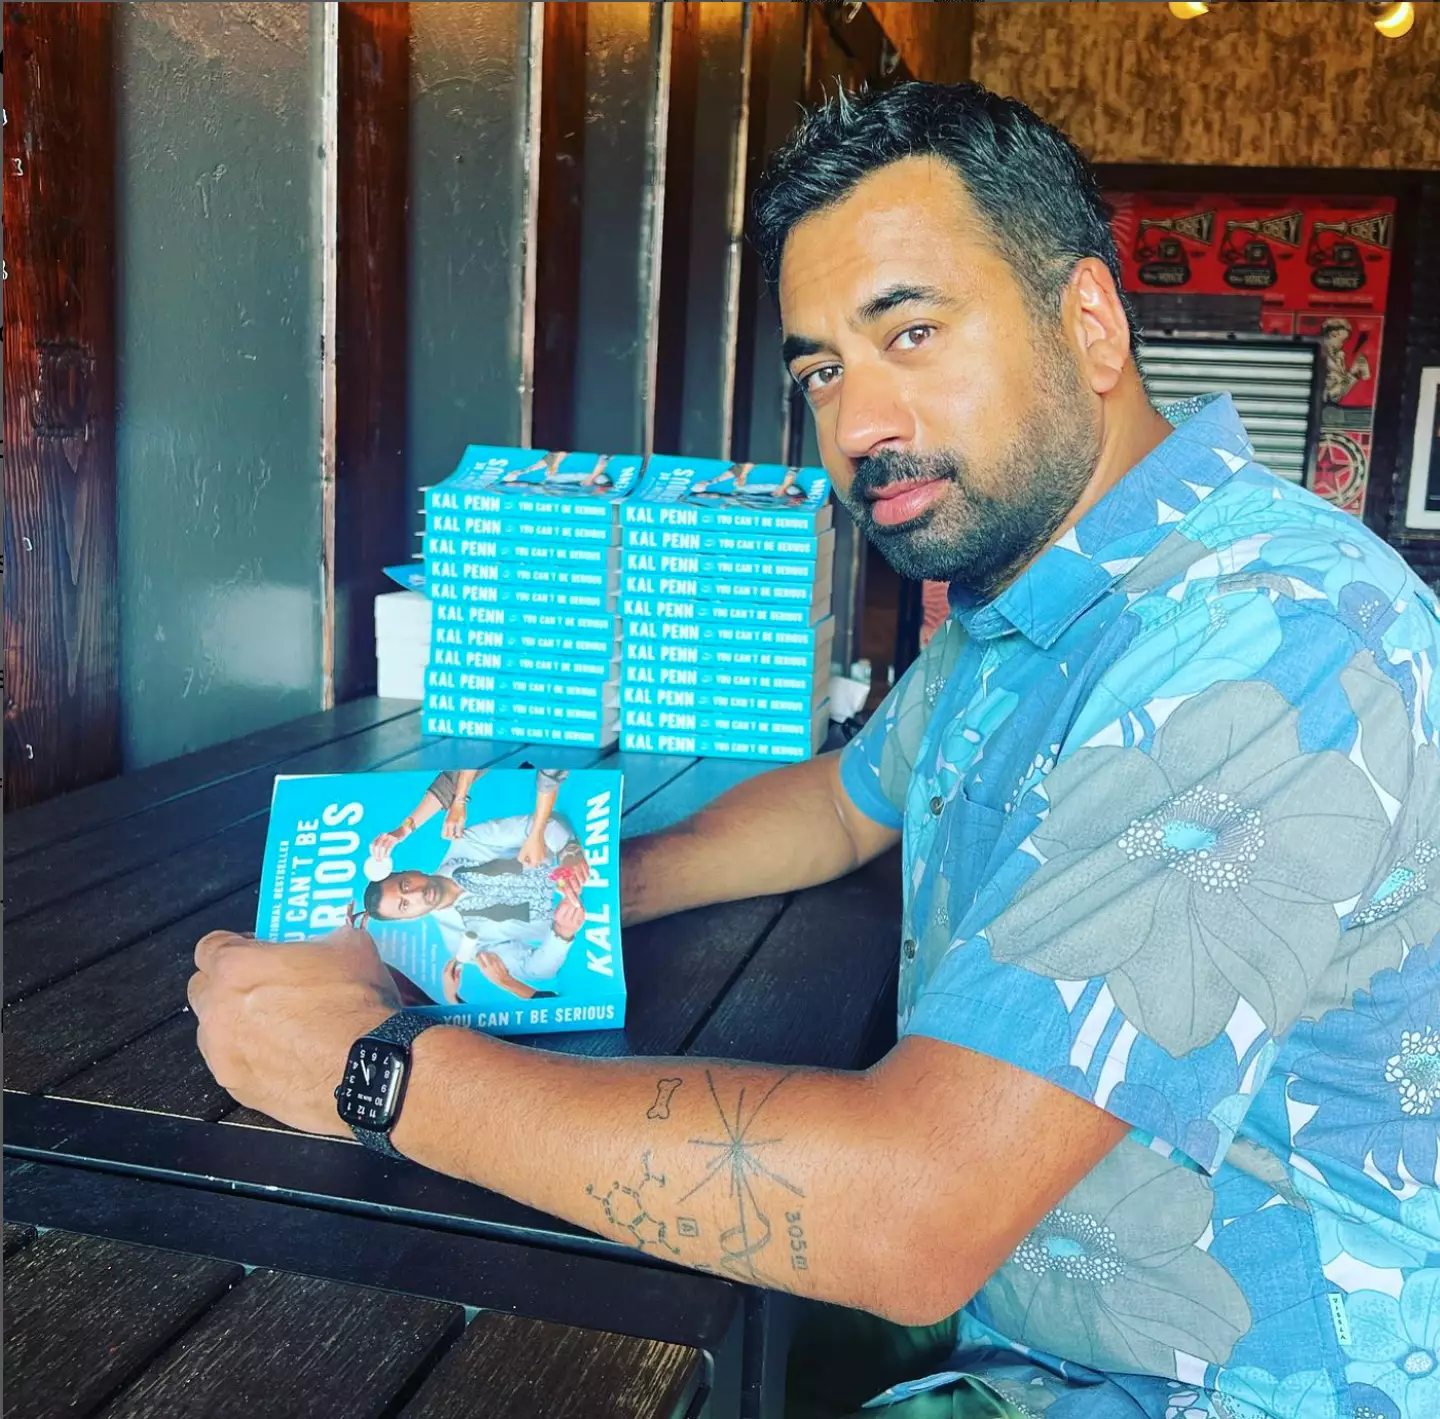 Kal Penn talked about his sexuality in the release of his memoir You Can’t Be Serious.